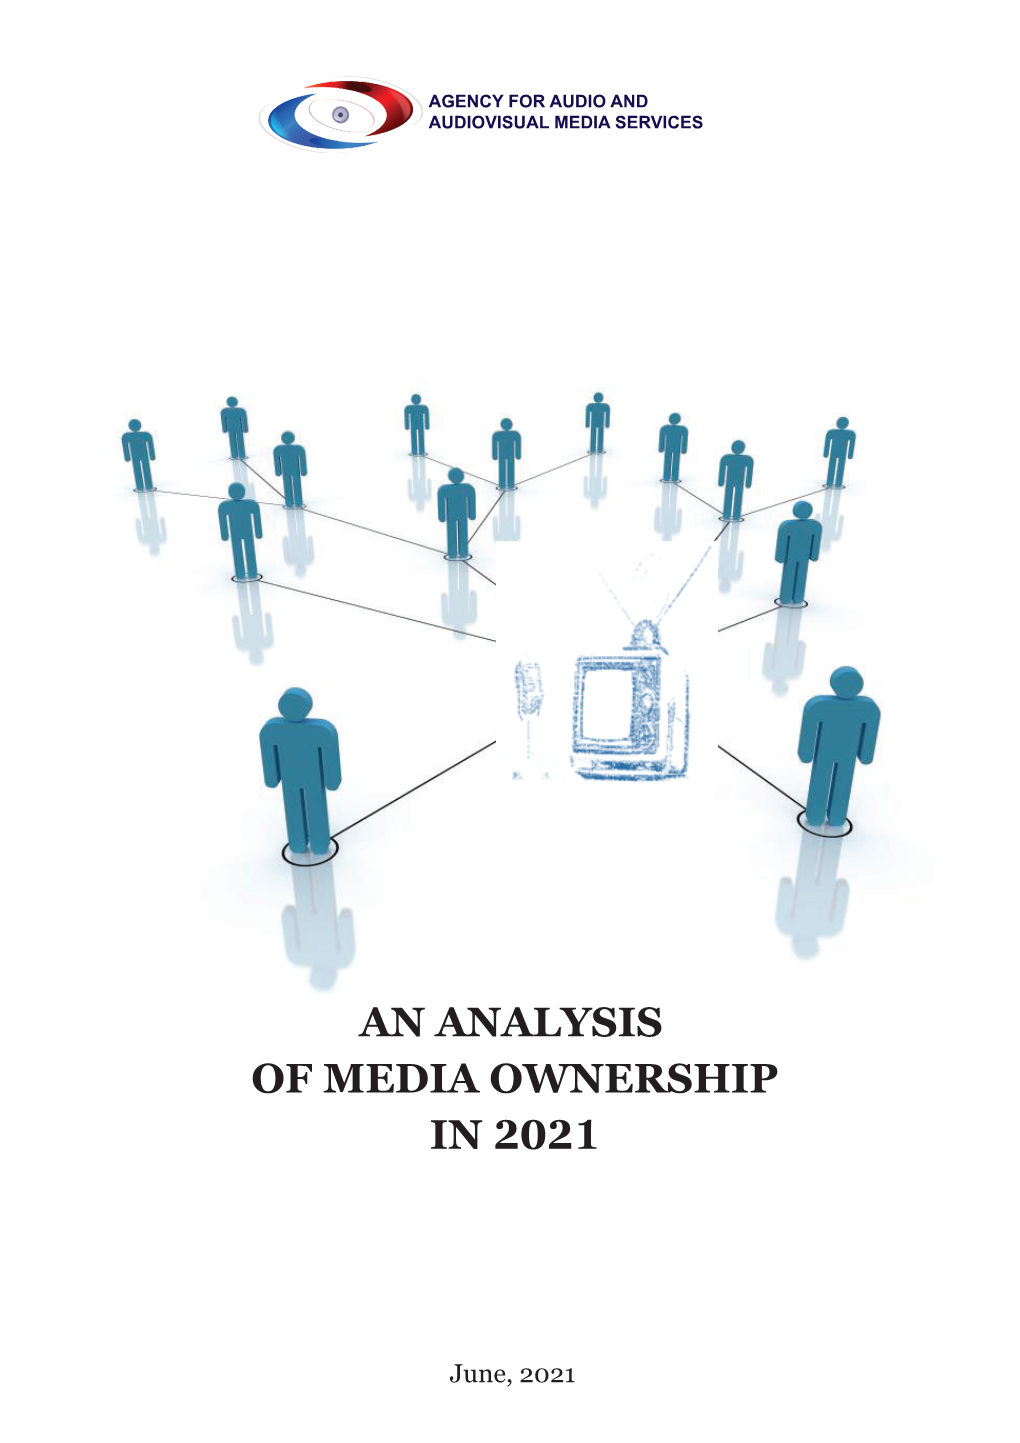 An Analysis of Media Ownership in 2021